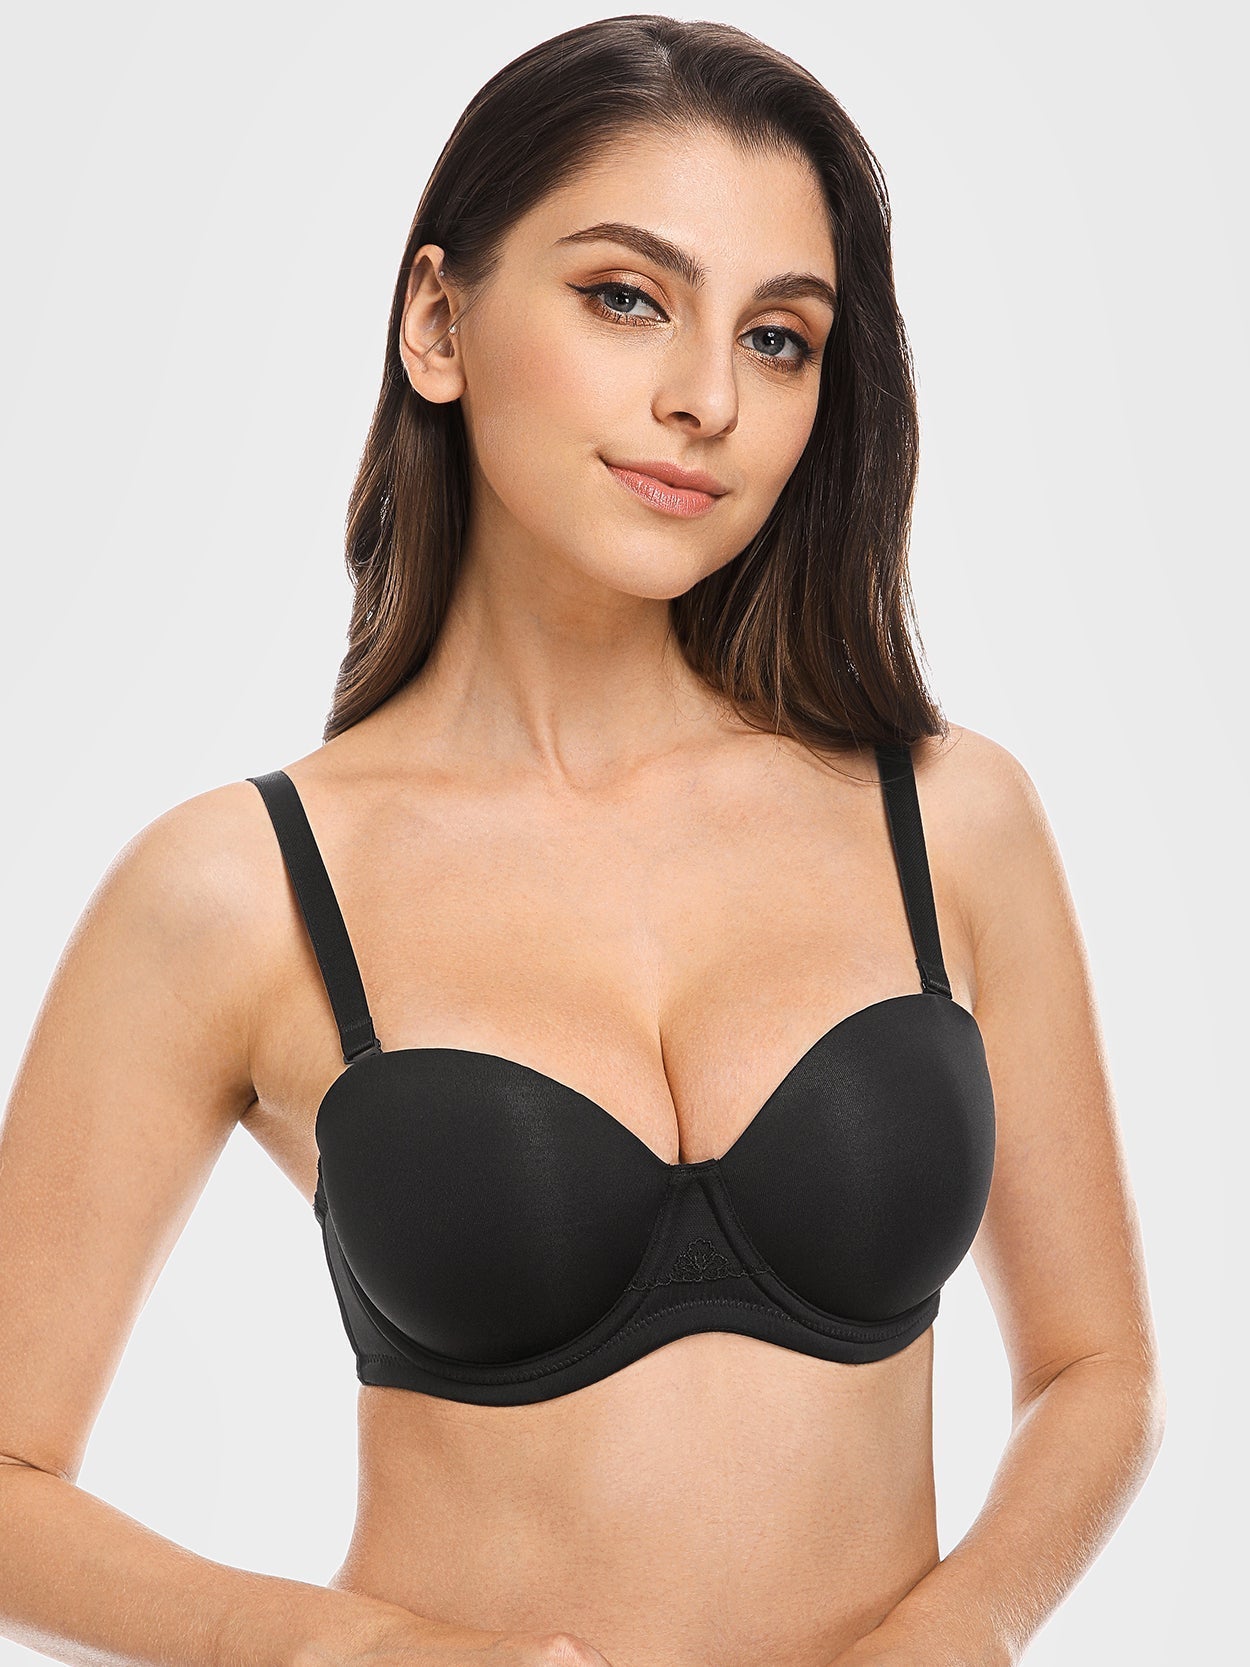 Wingslove Strapless Bra for Women Plus Size Push Up Underwire Multiway  Support Bra, Black 42C 